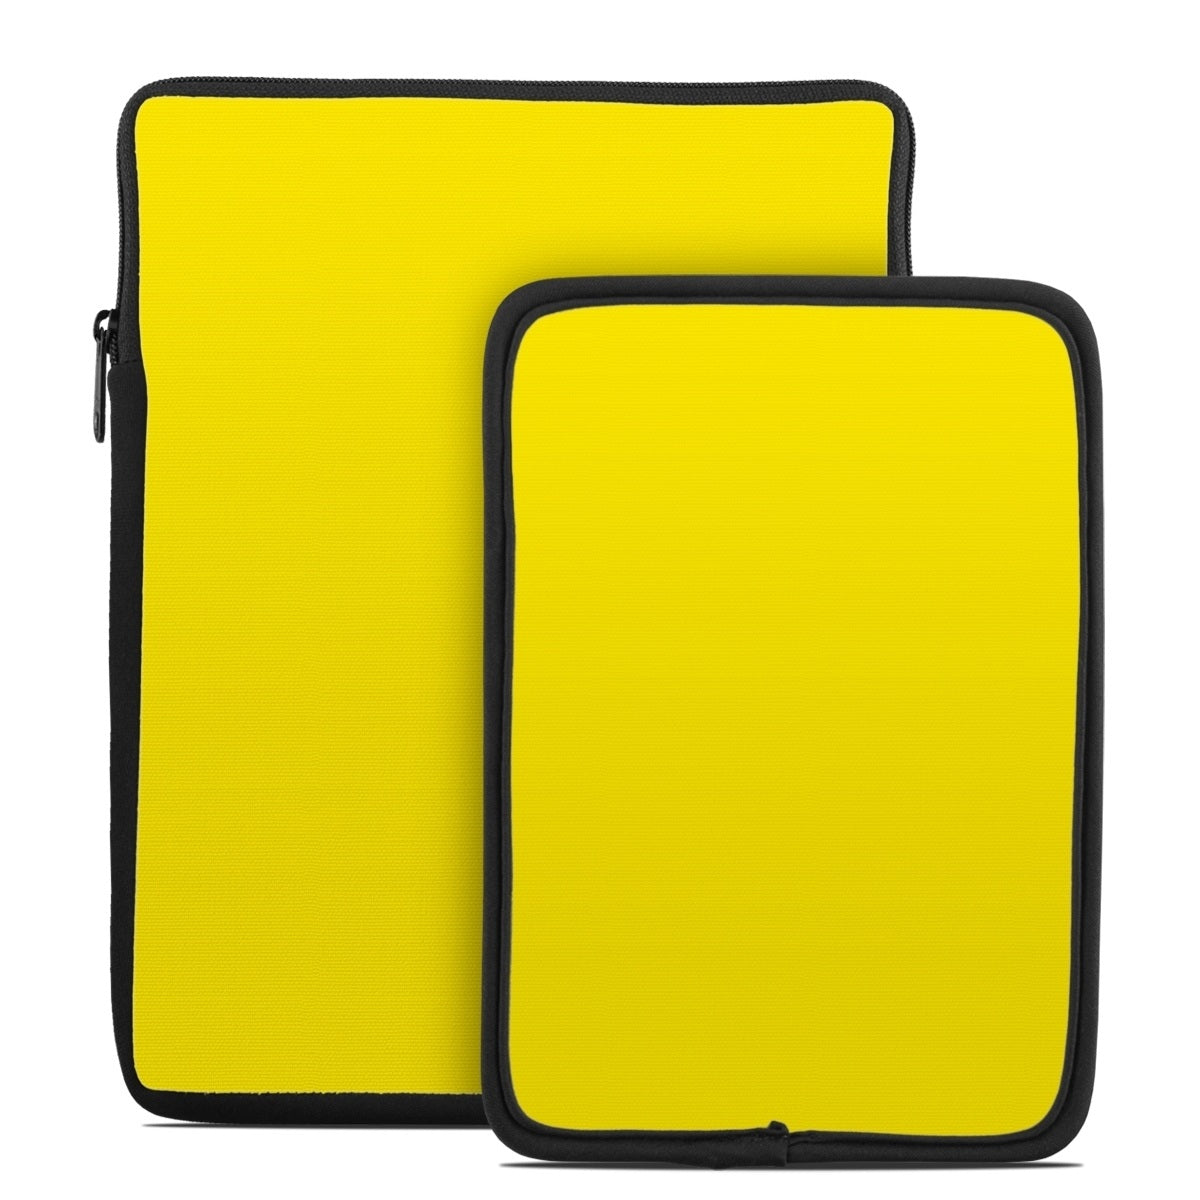 Solid State Yellow - Tablet Sleeve